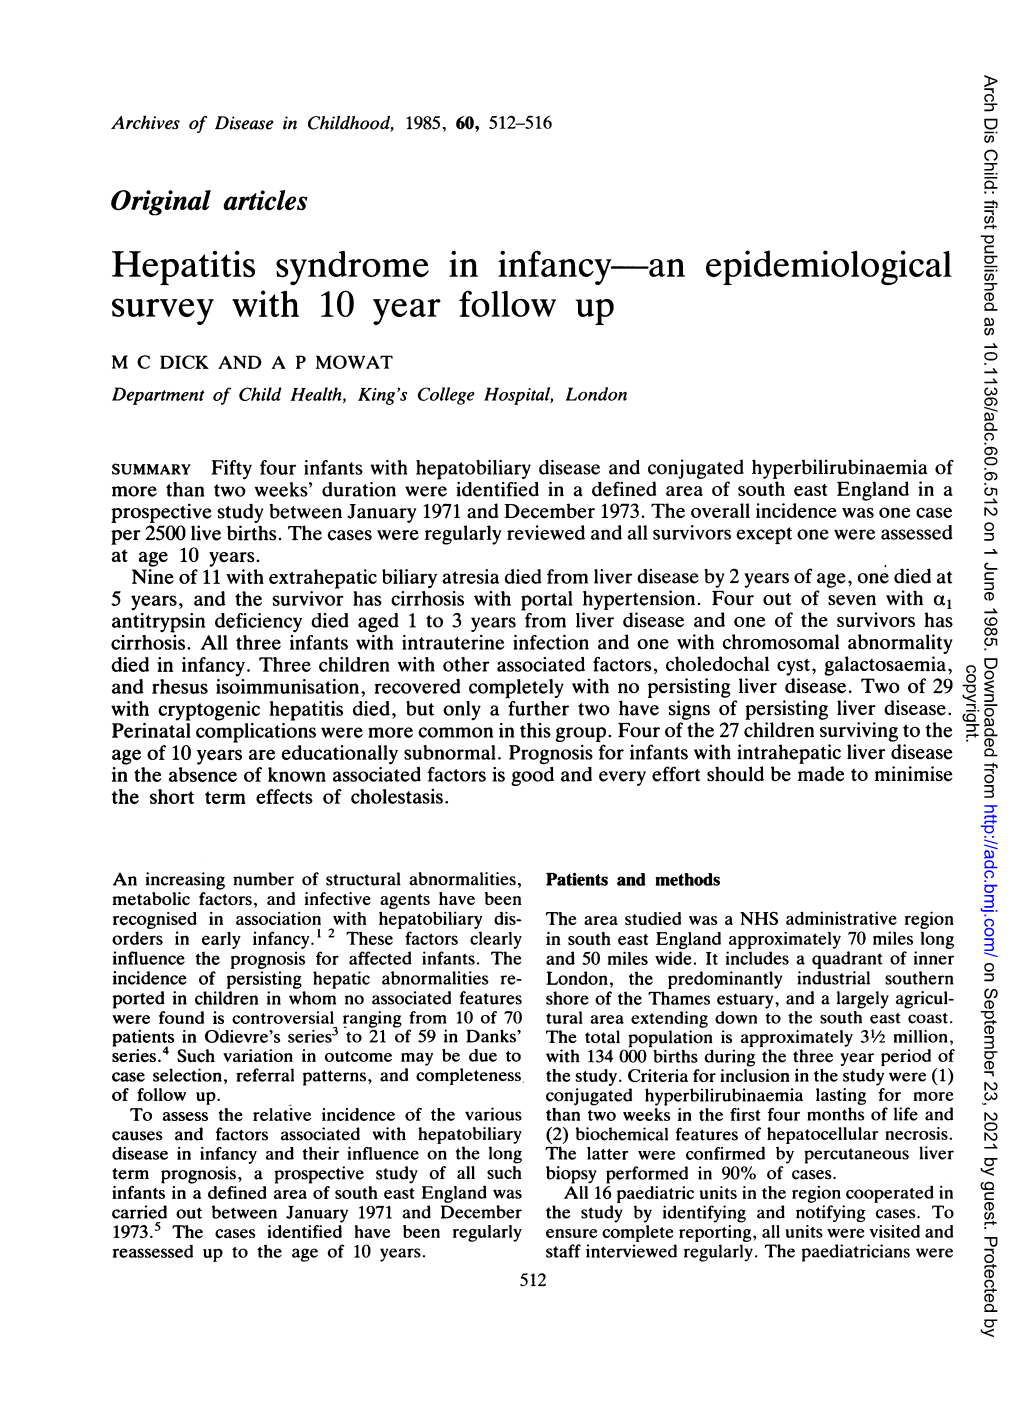 Hepatitis Syndrome in Infancy-An Epidemiological Survey with 10 Year Follow Up